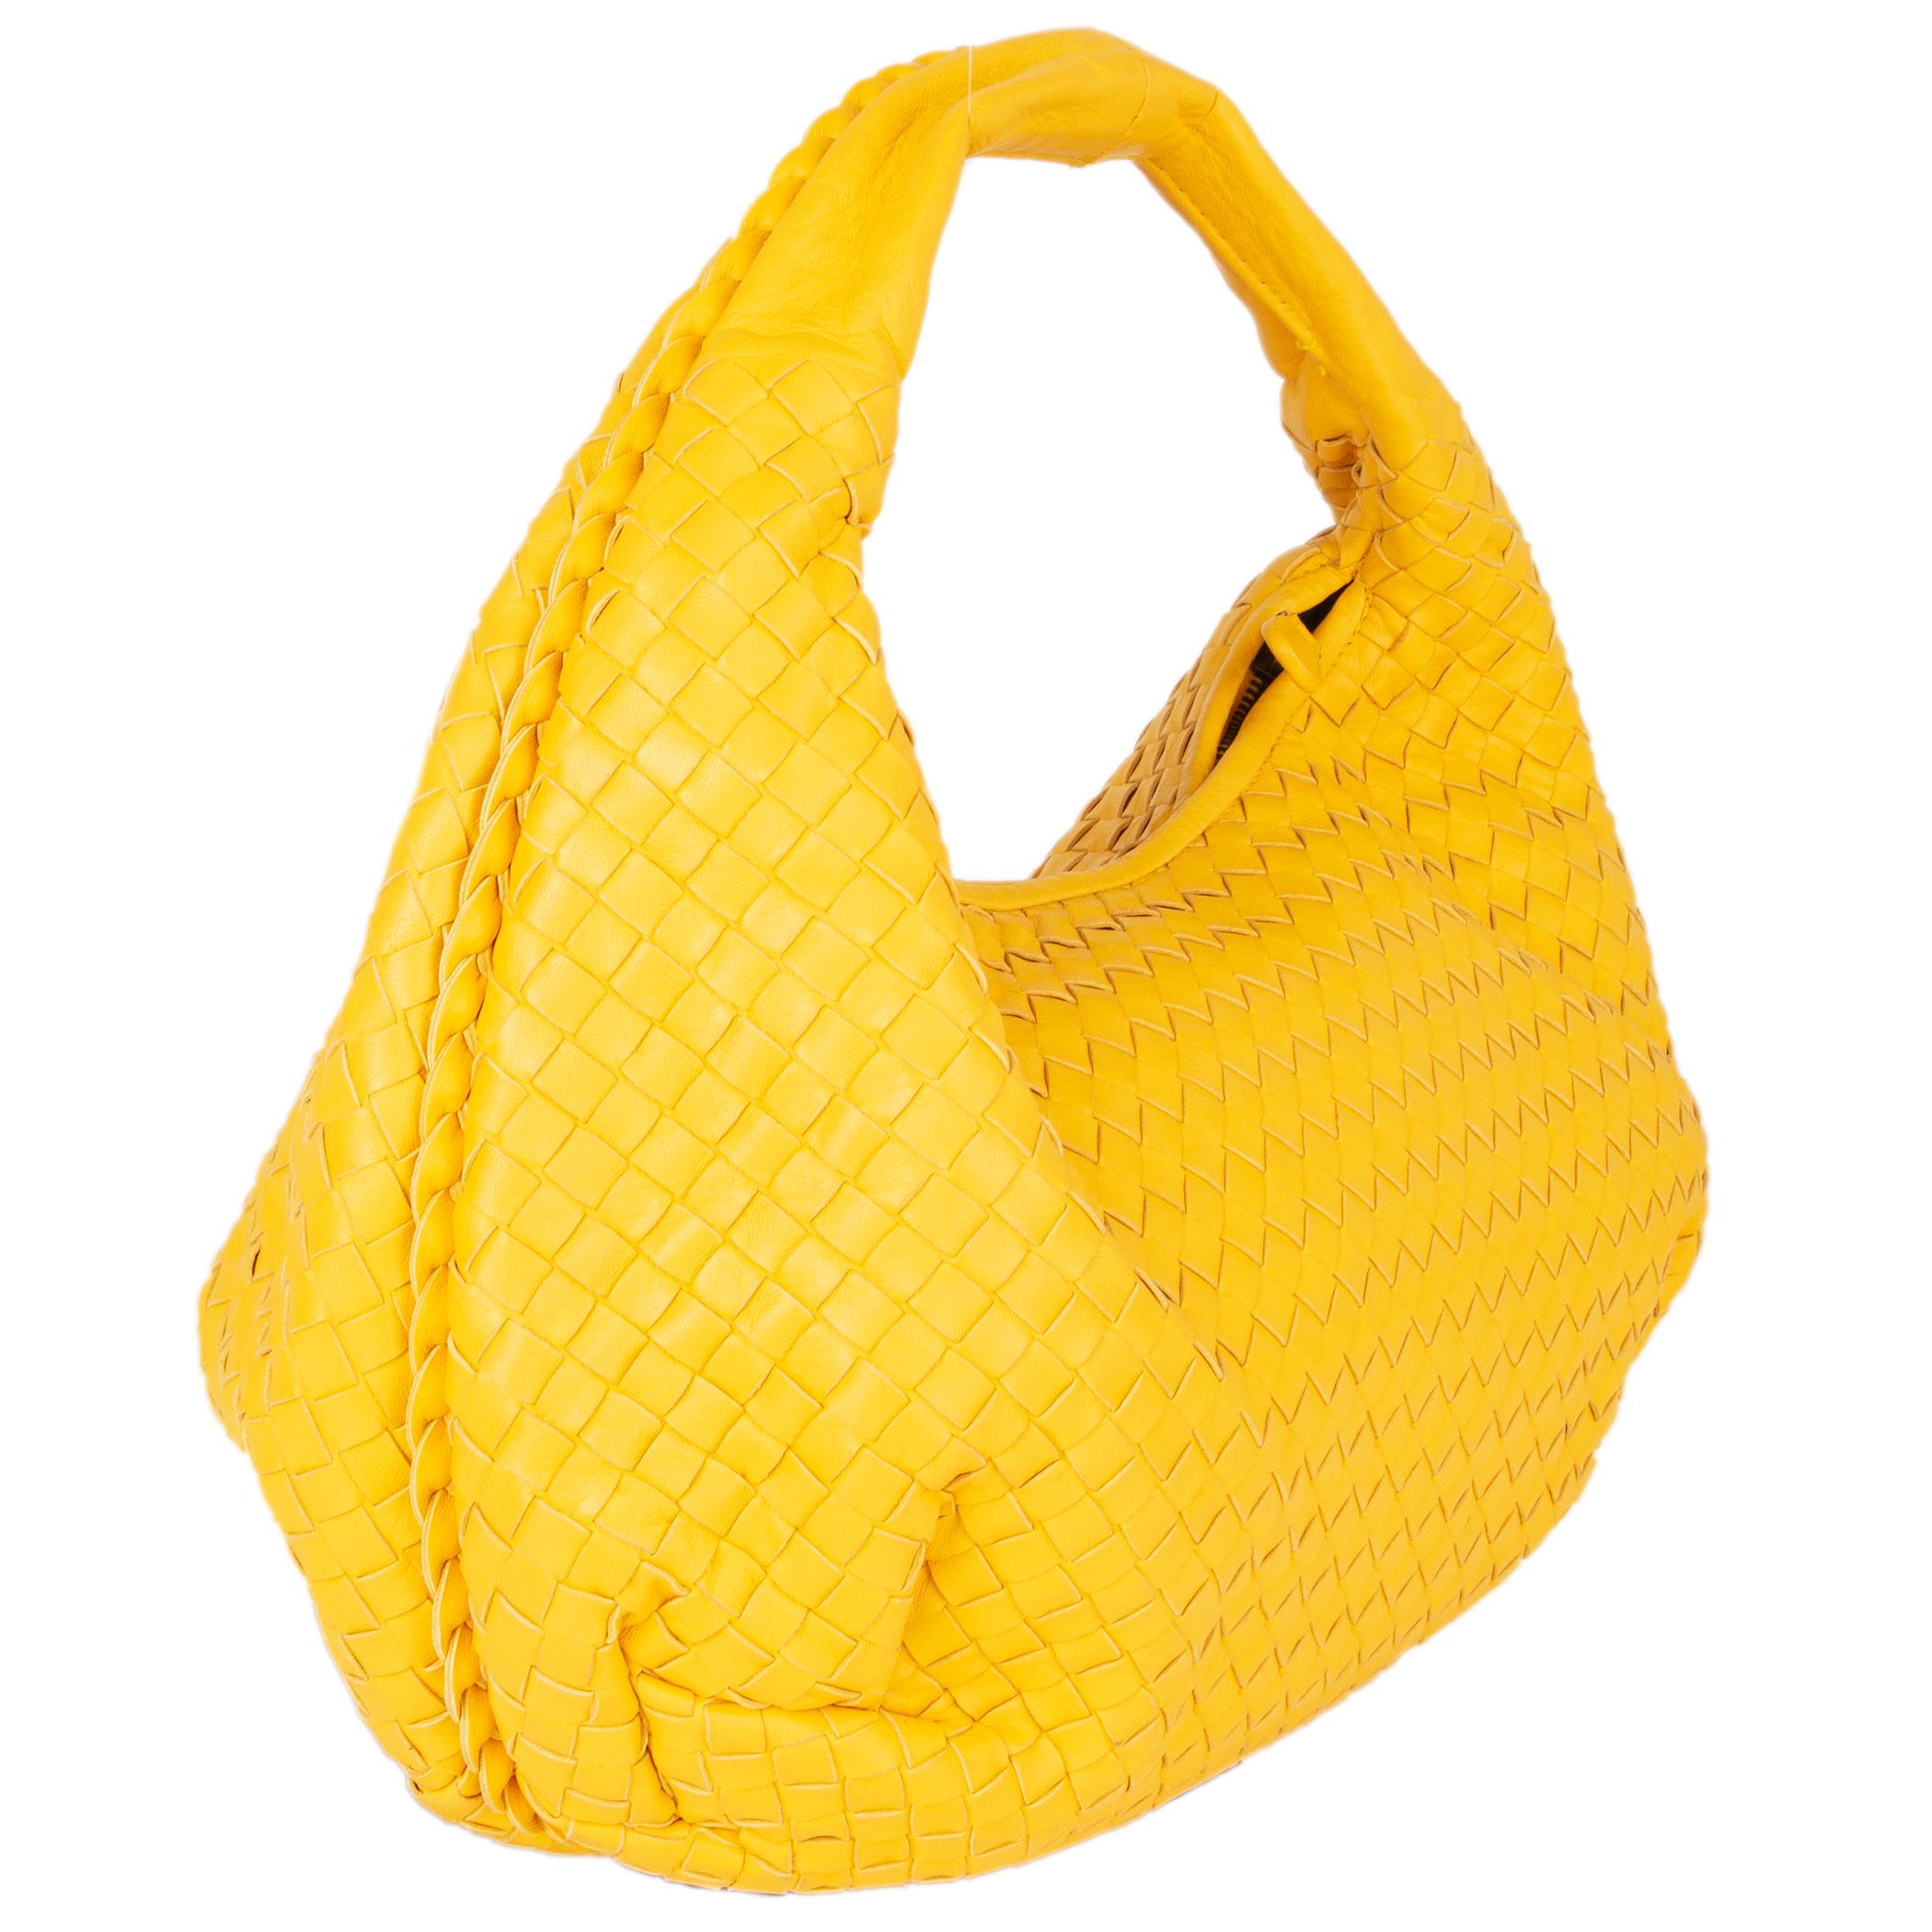 Bottega Veneta 'Belly Veneta Medium' hobo handbag in yellow inrtecciato nappa leather. Have been carried once and is in virtually new condition. Comes with pocket mirror.

Height 28cm (10.9in)
Width 44cm (17.2in)
Depth 7cm (2.7in)
Drop of the Handle